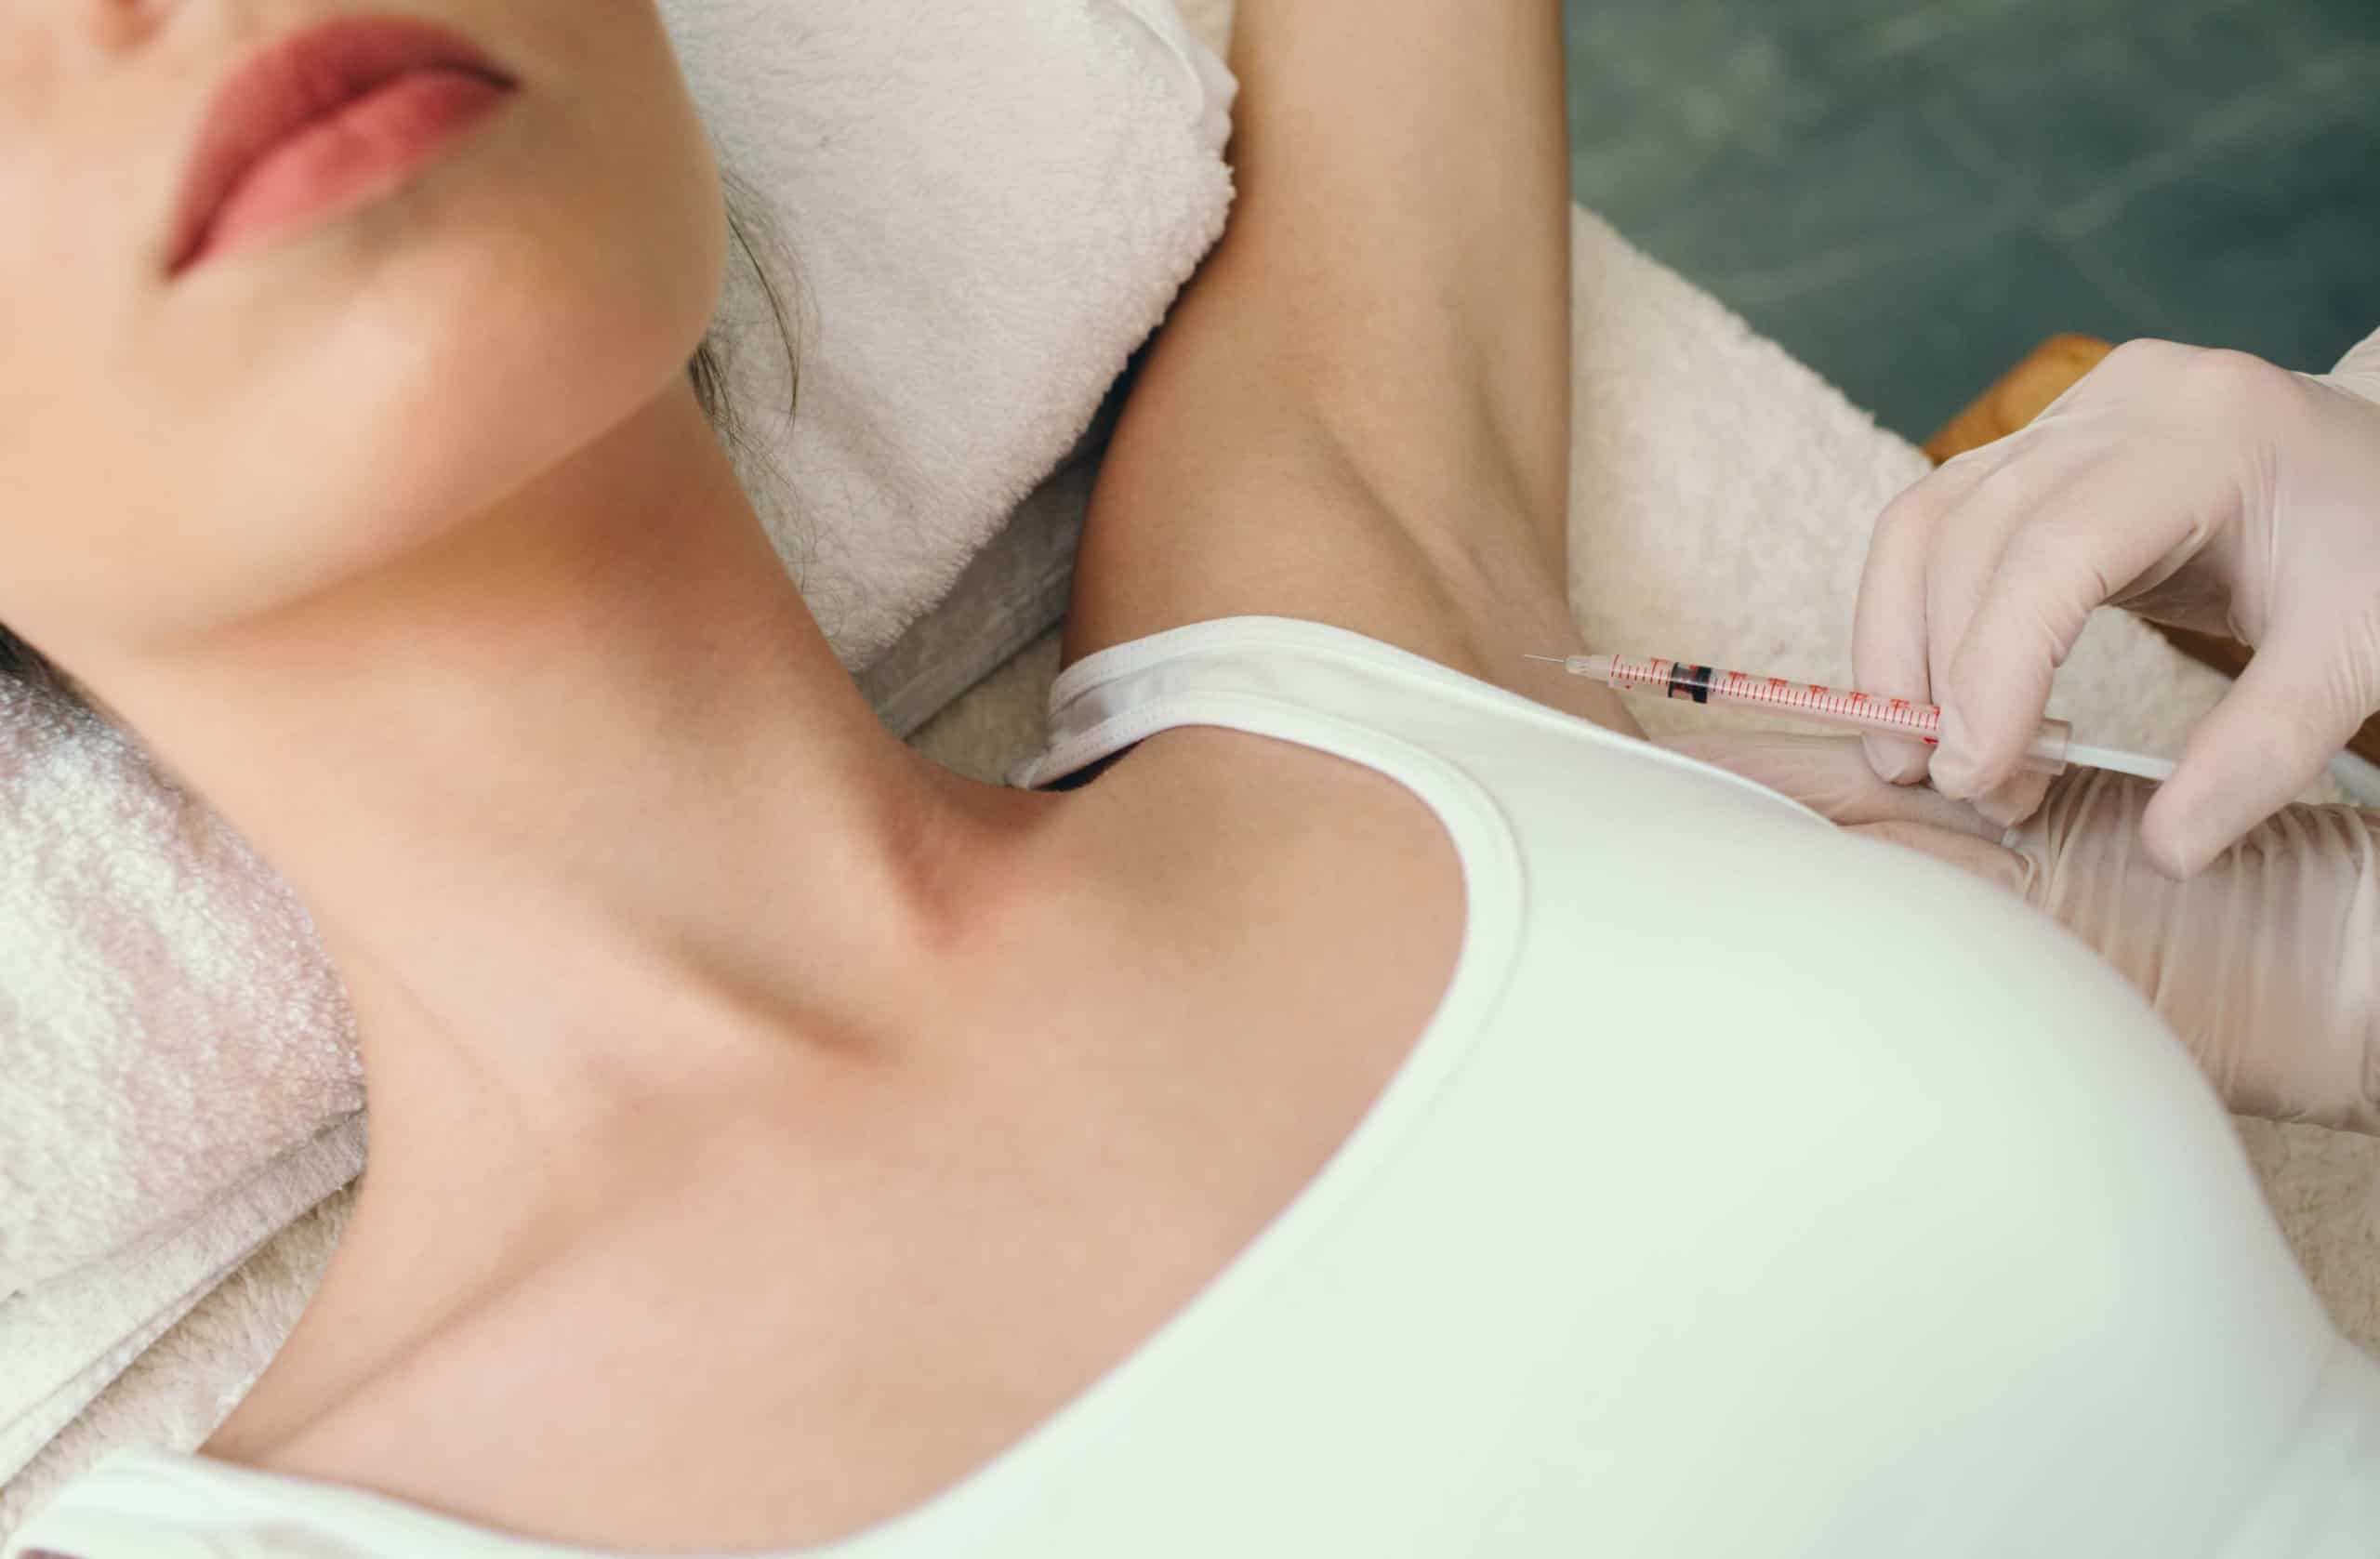 Botox Injections Offer Relief from Excessive Sweating in MD Beauty Spa in Scottsdale, AZ